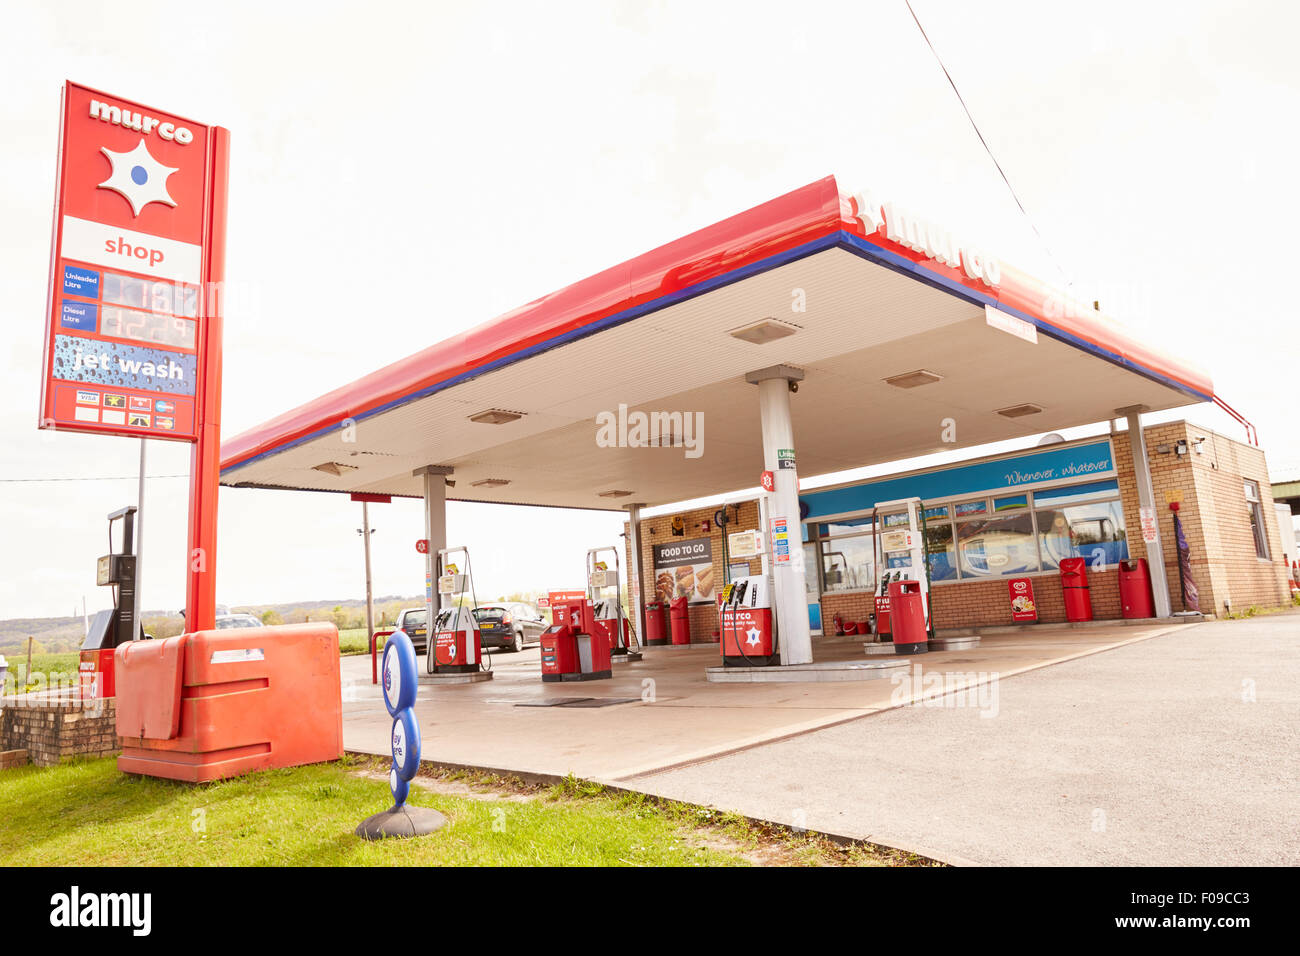 Petrol station, exterior view Stock Photo